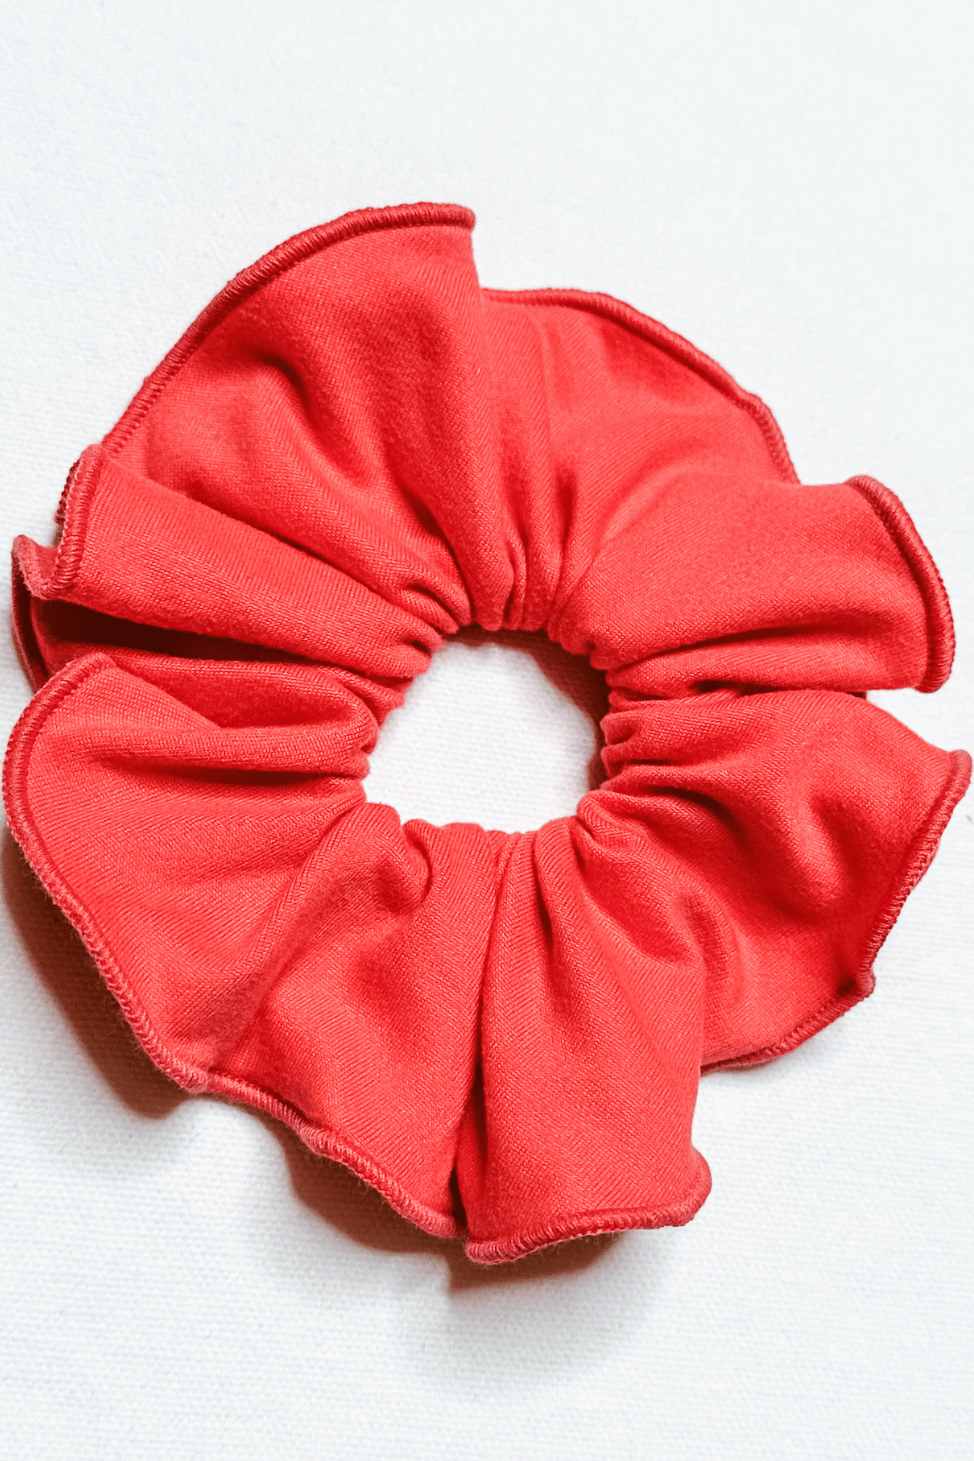 Scrunchie in Coral color from Diane Kroe